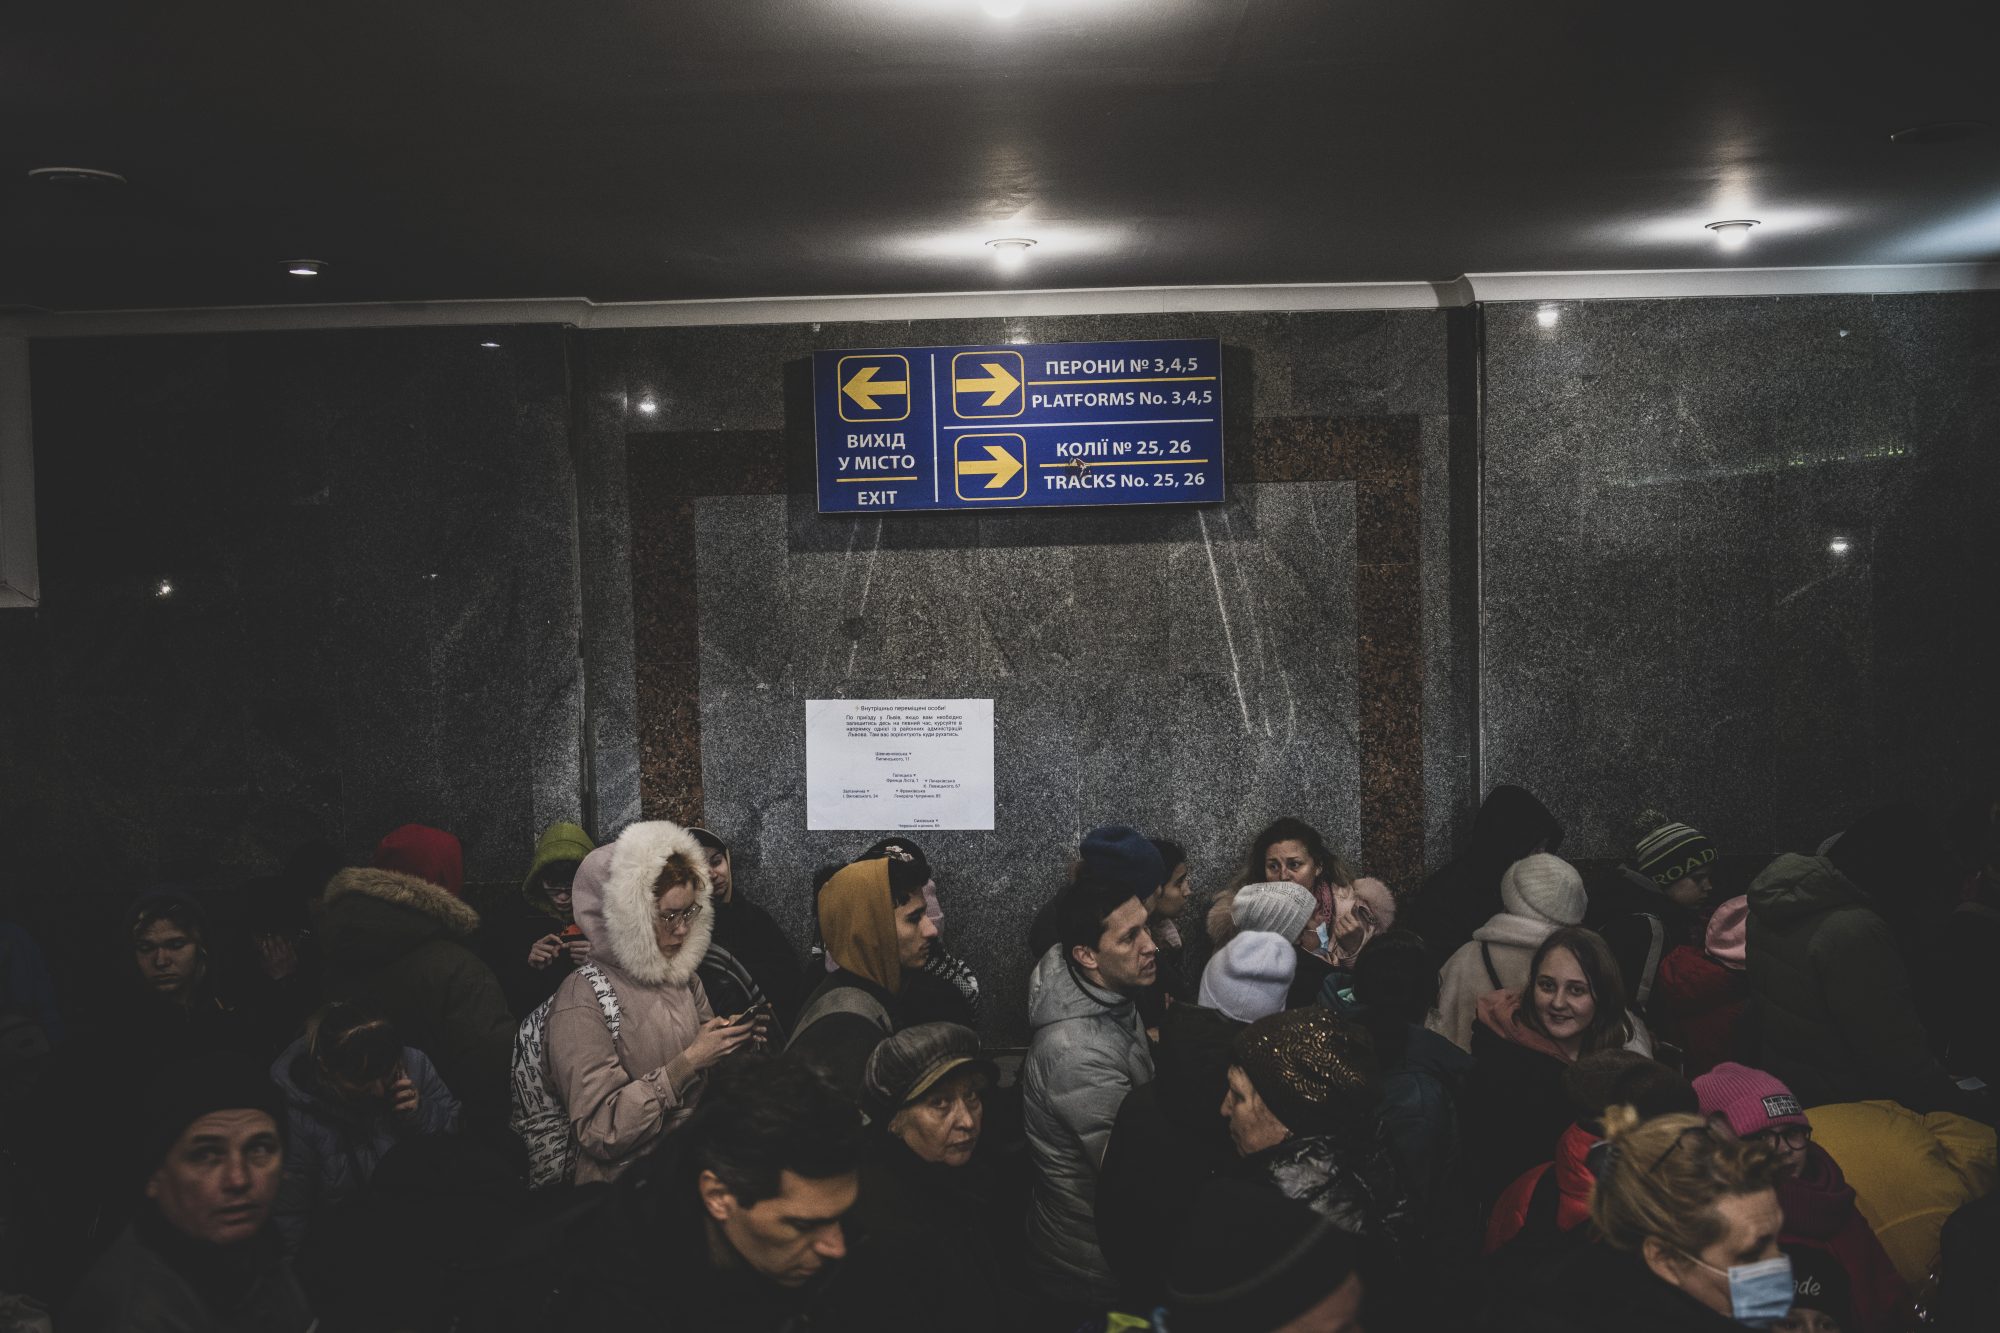 Lviv, Ukraine - March 3, 2022: A long line of people wait to board a train to Poland in Lviv, Ukraine.